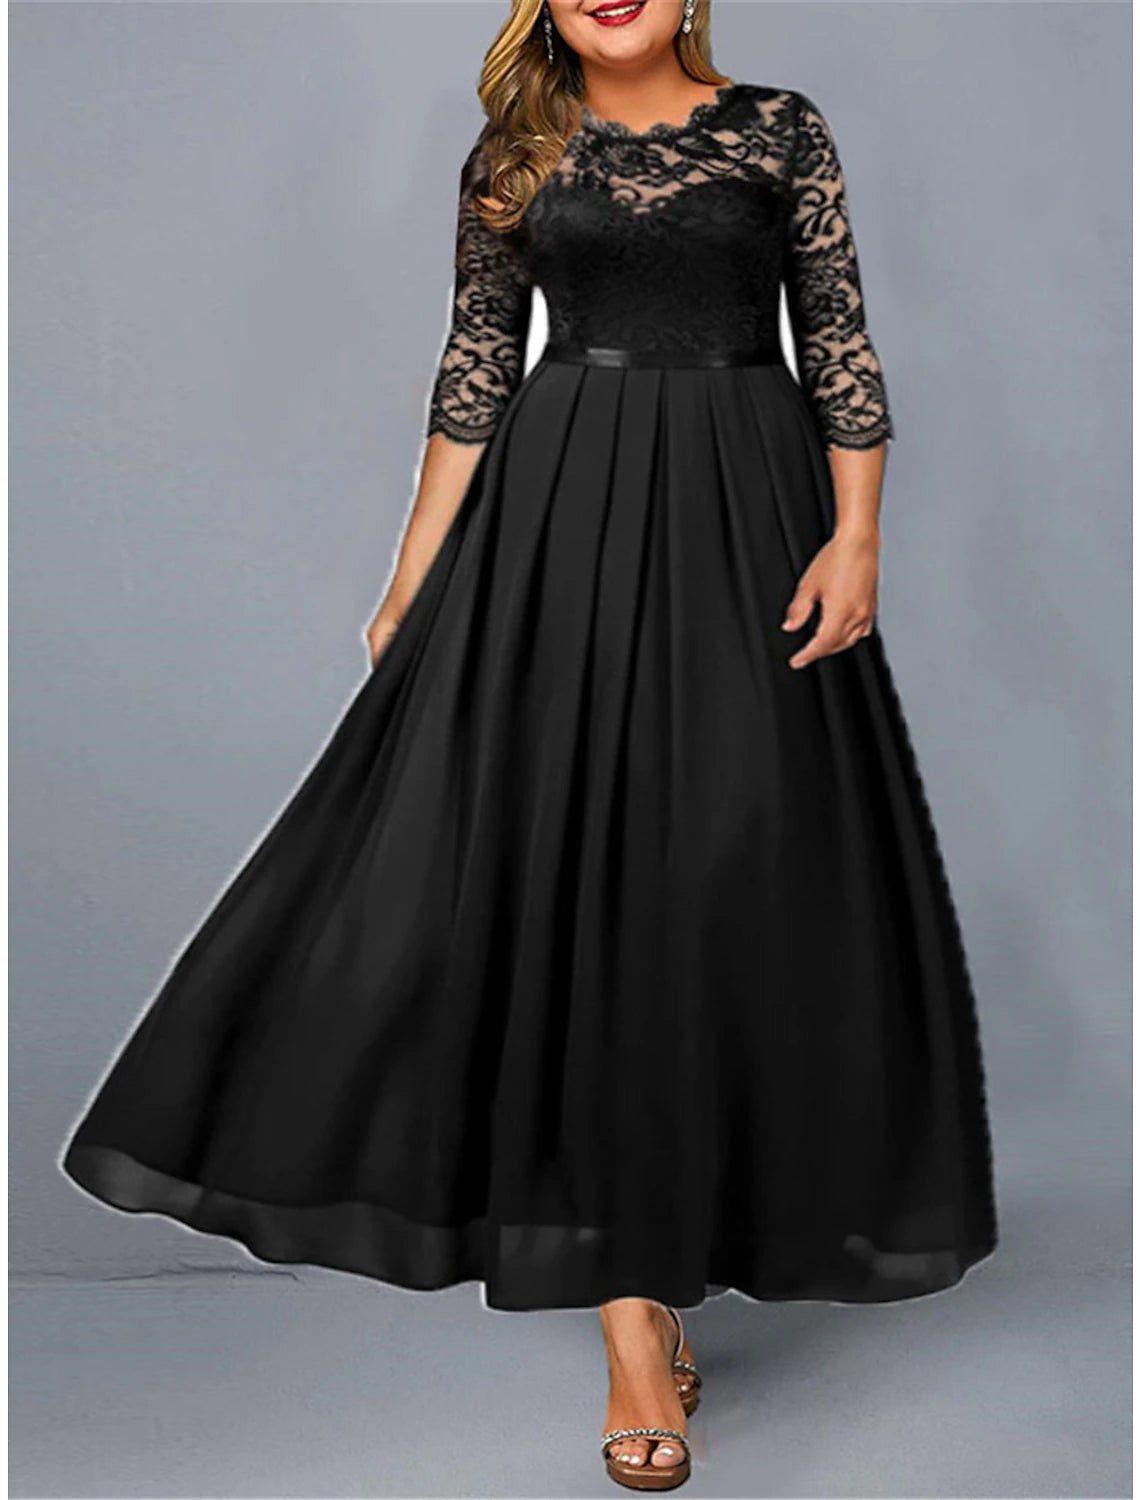 Women's Plus Size Green Chirstmas Dress Curve Party Dress Lace Dress Homecoming Dress Solid Color Long Dress Maxi Dress 3/4 Length Sleeve Lace Crew Neck Modern Party Black Wine Summer Spring